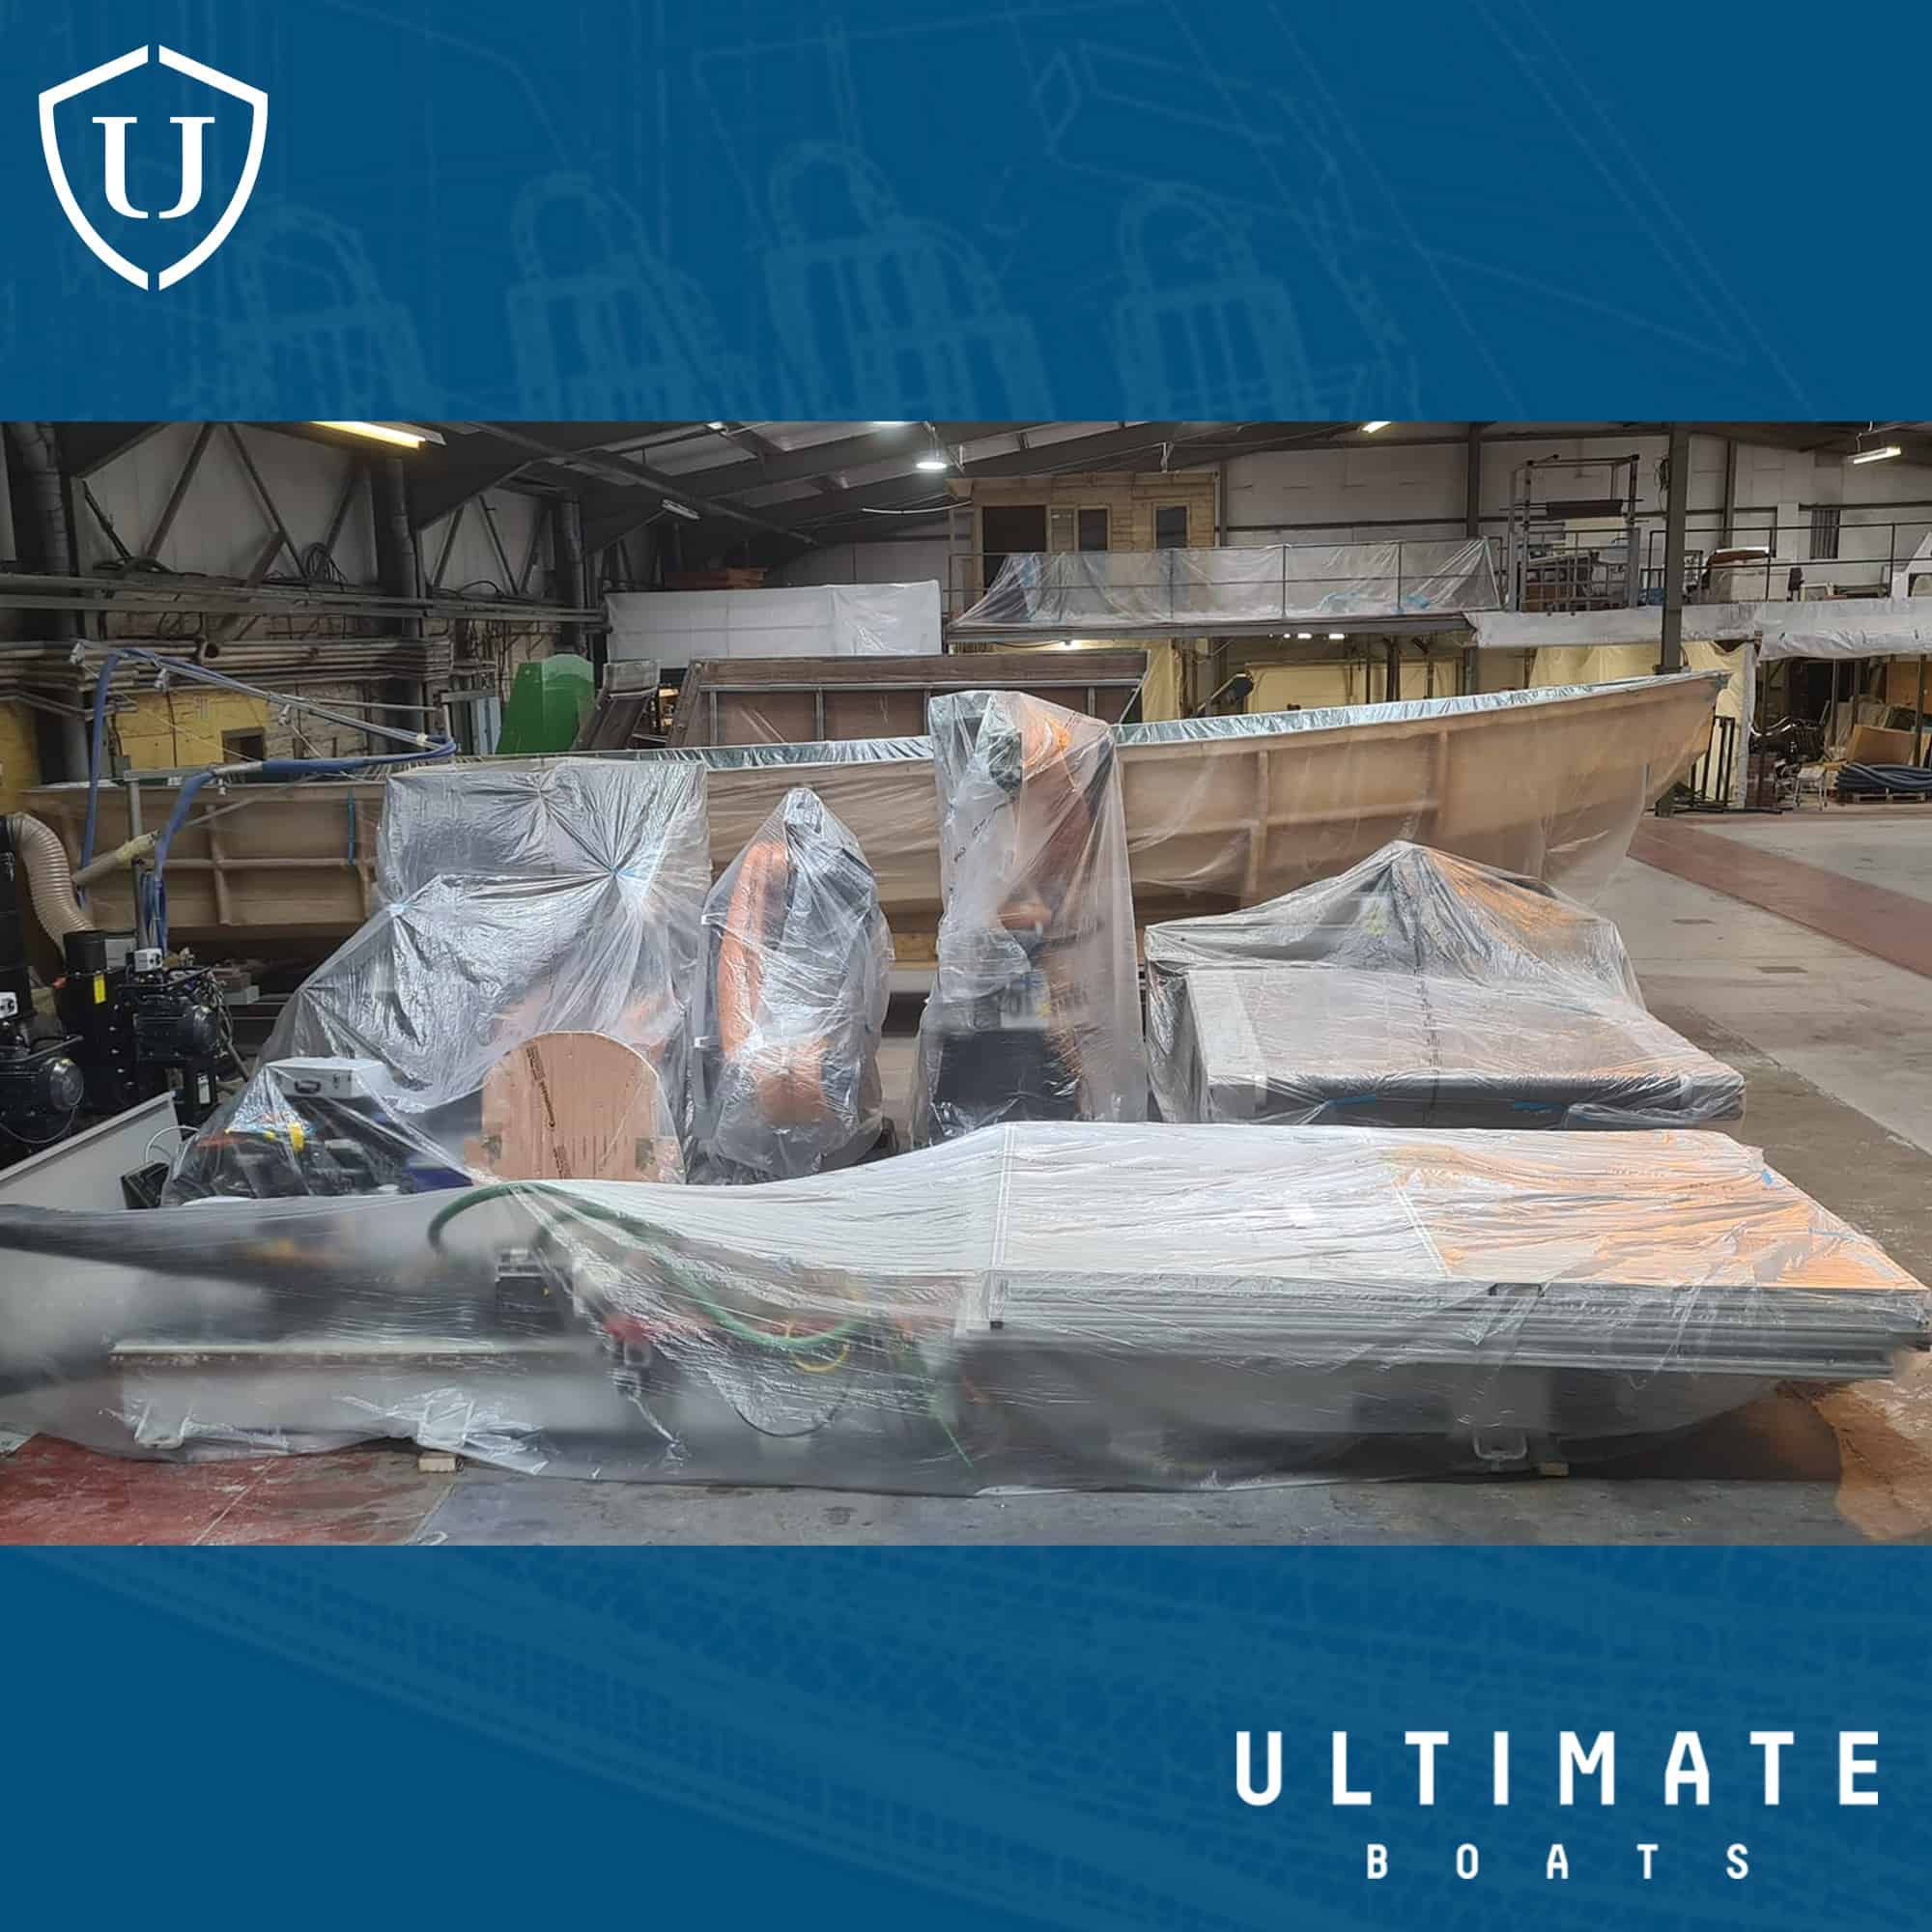 Ultimate Boats - RIBs ONLY - Home of the Rigid Inflatable Boat